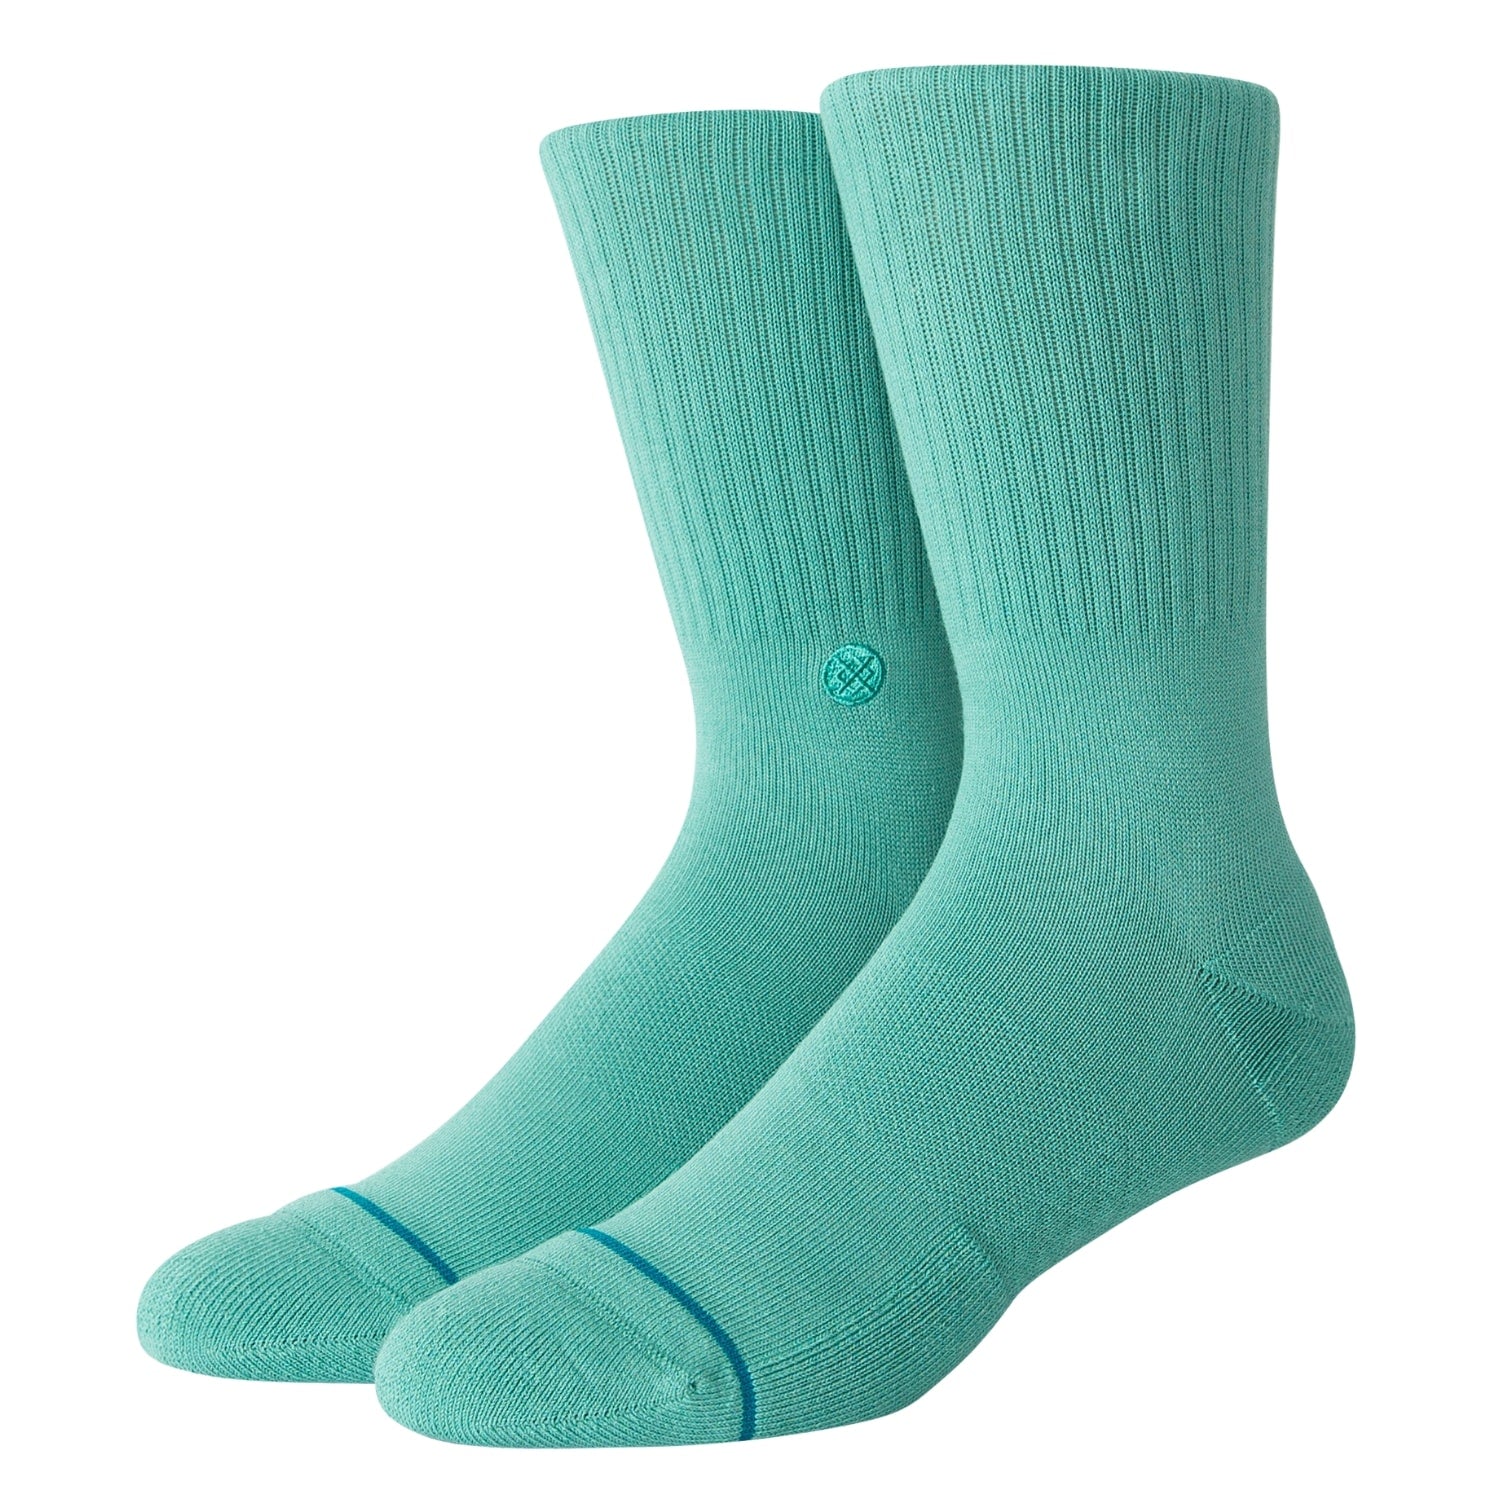 Stance Icon Socks - Turquoise - Mens Crew Length Socks by Stance